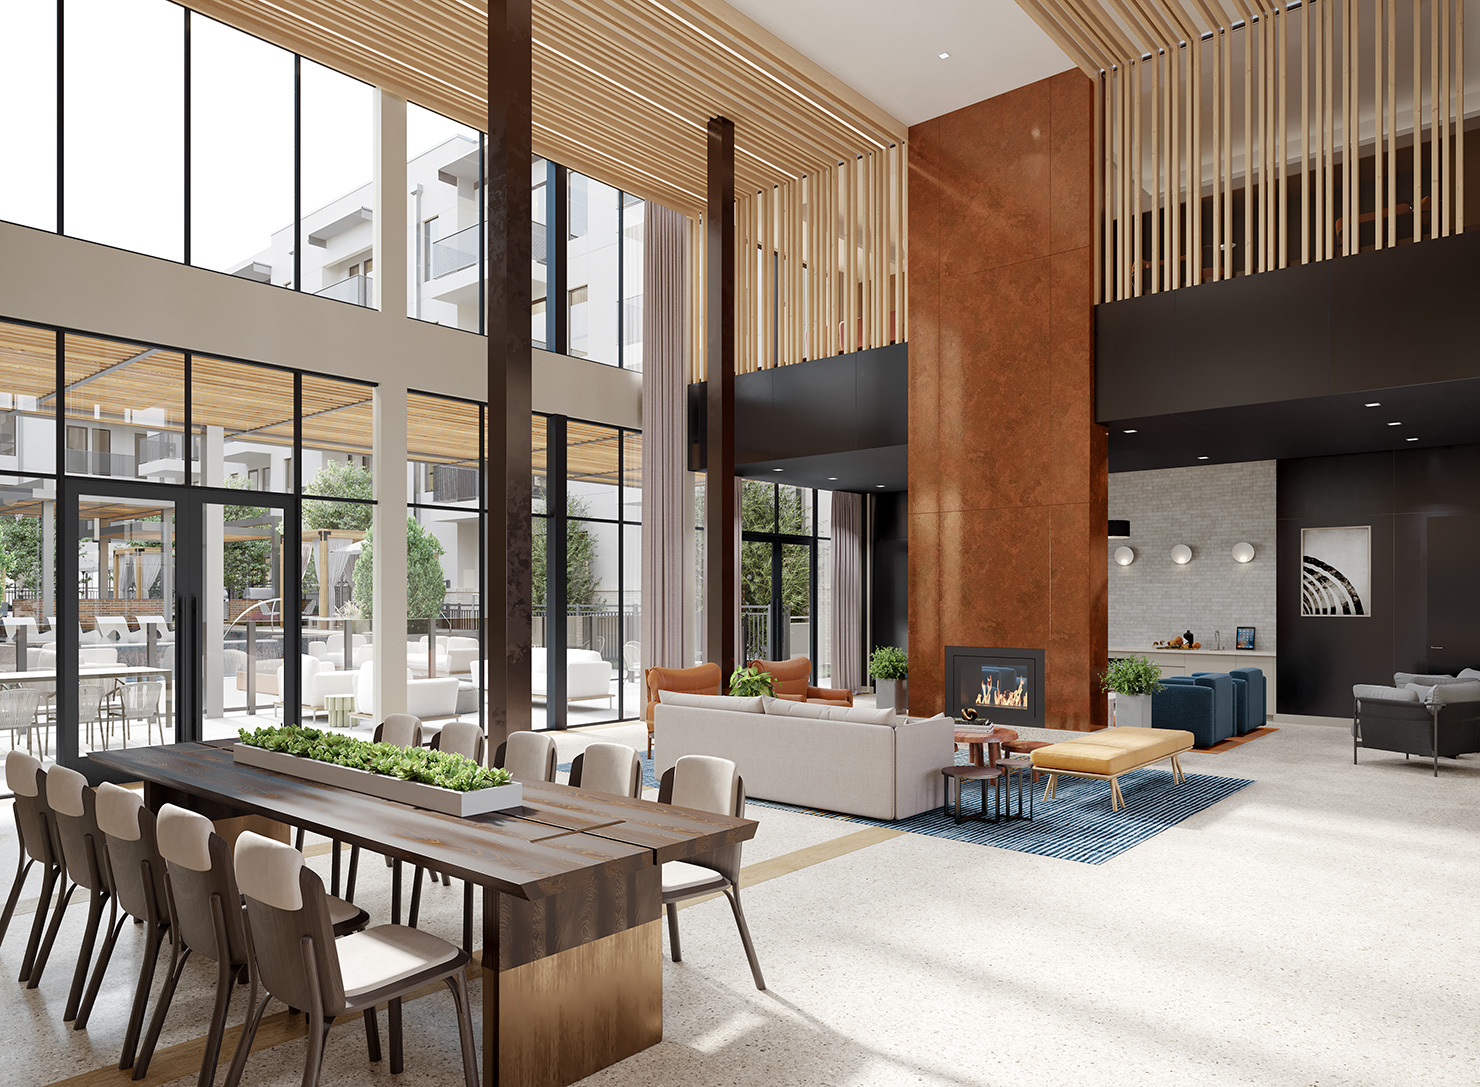 Ferro two-story lobby with fireplace, seating and communal table